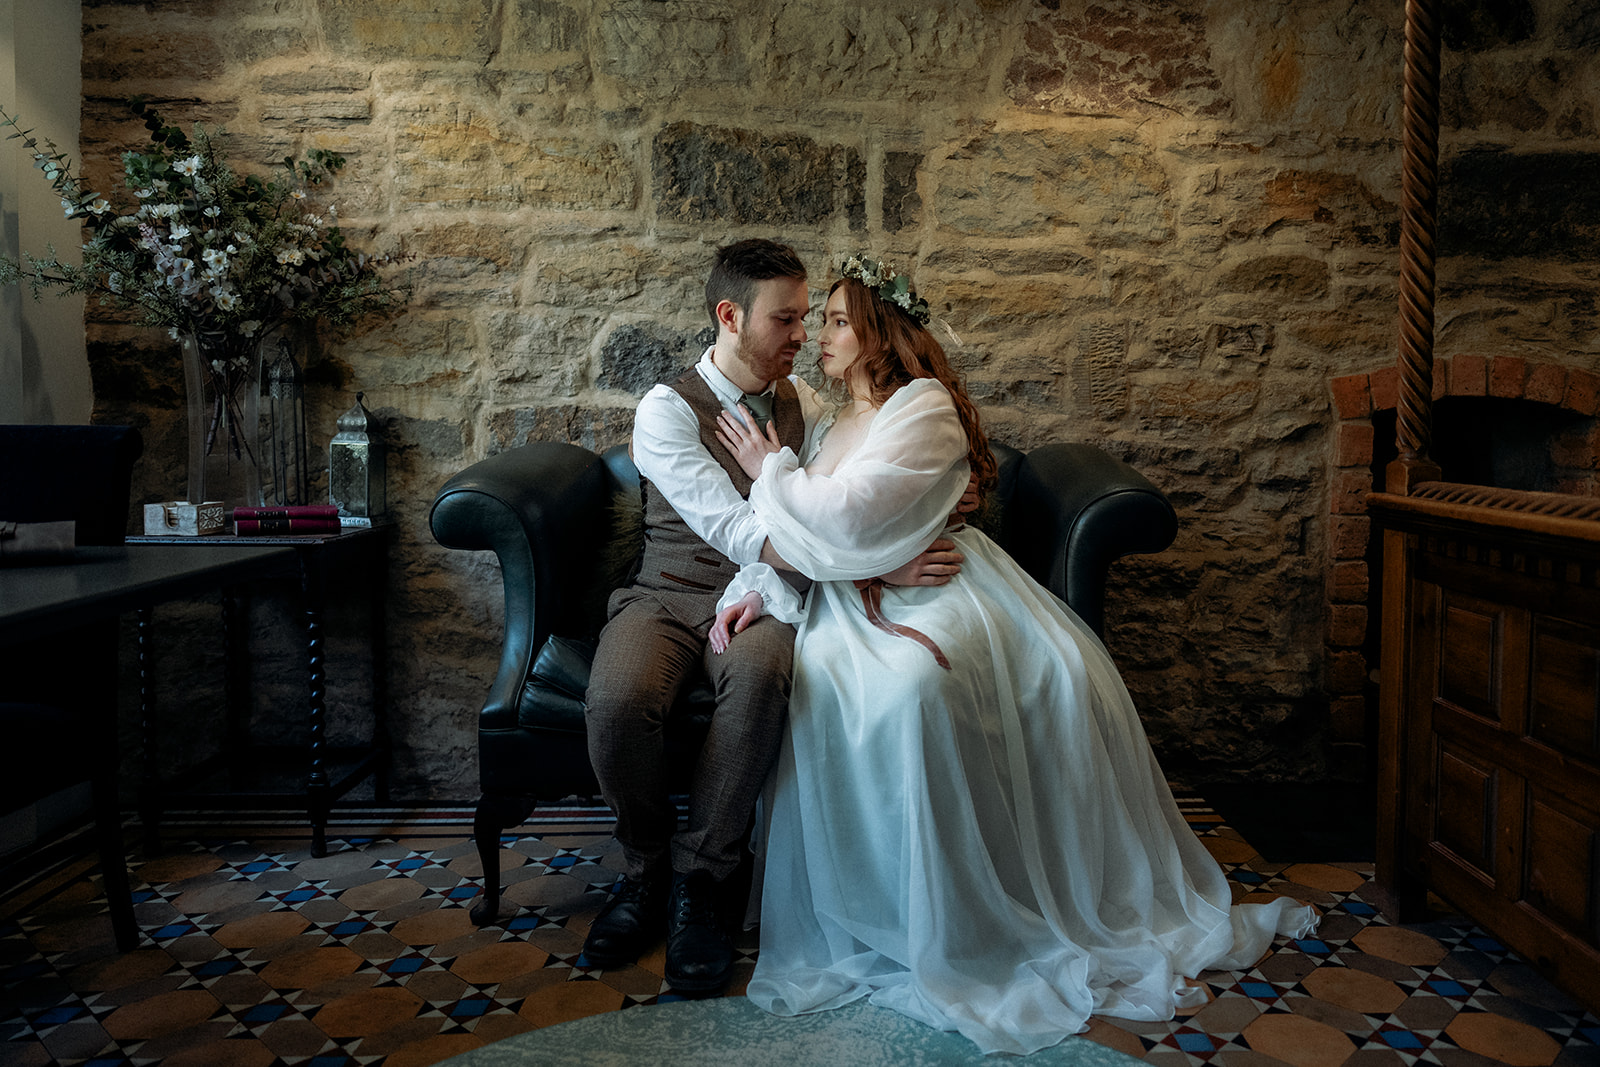 Ethereal wedding dress designed by Cora Stitch in Scotland. Bride and groom sat having a private moment together.